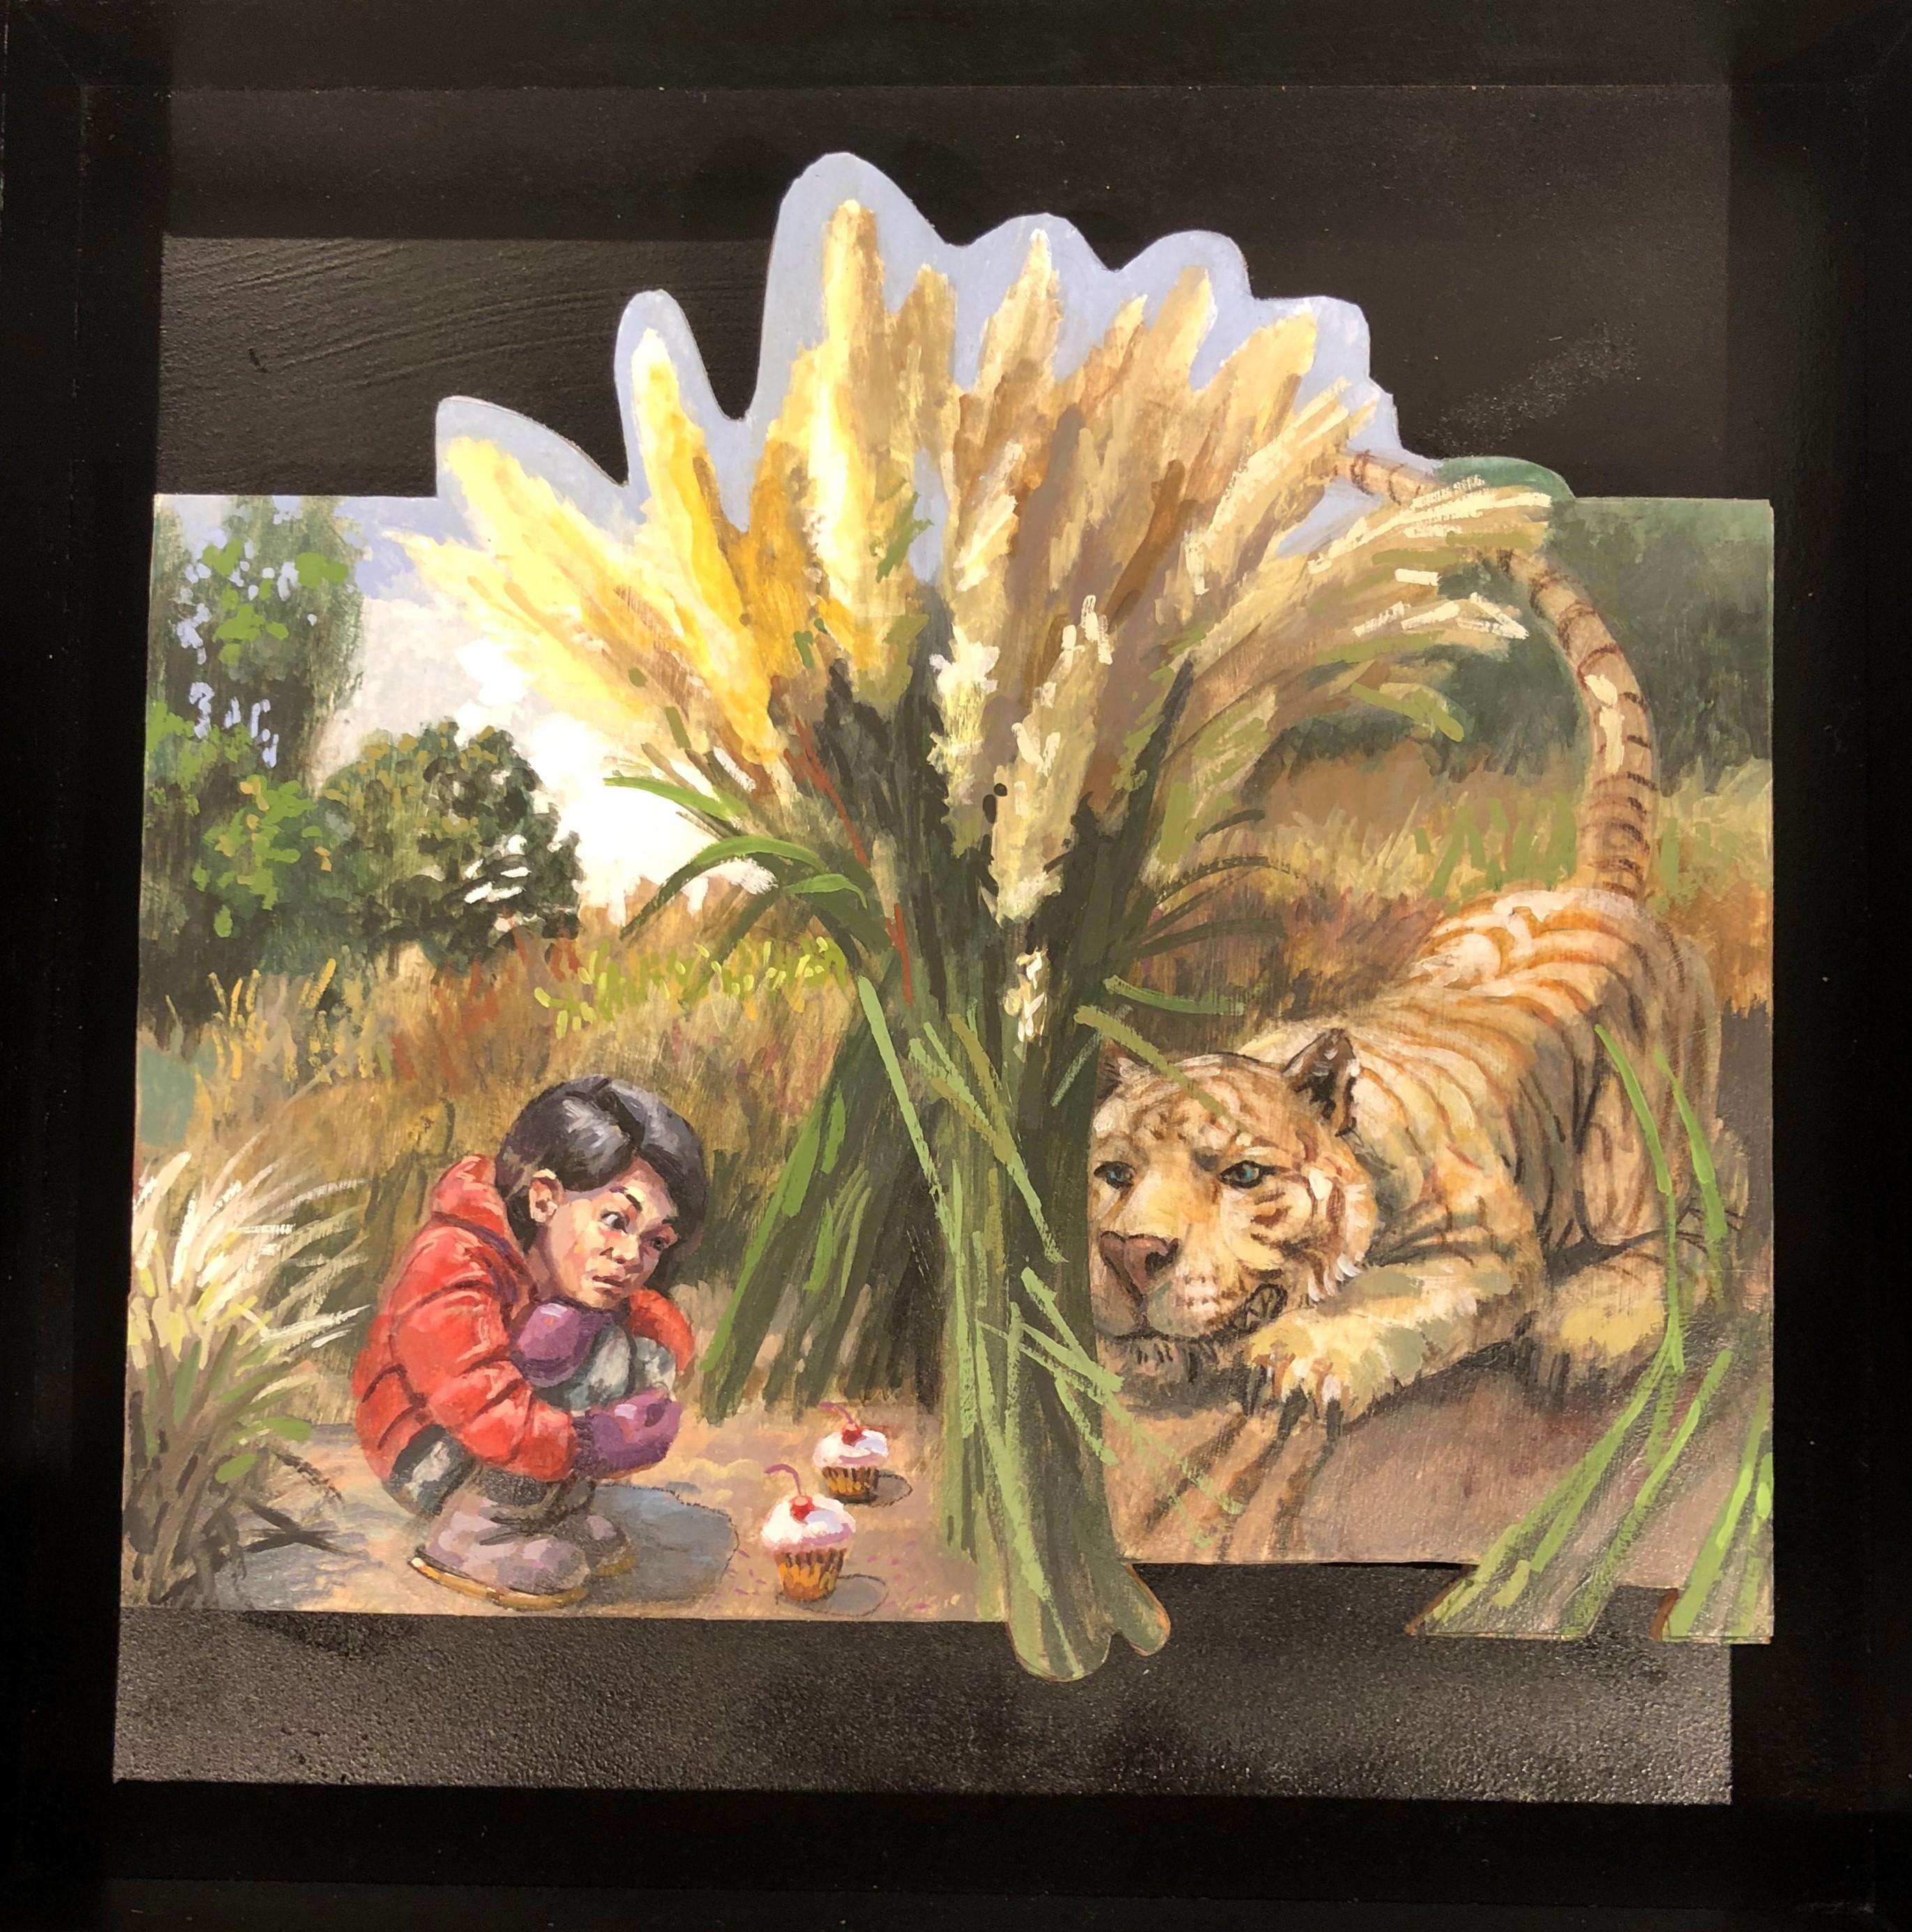 Benjamin Duke Figurative Painting - Trap #1,  Small Child and Tiger, Oil on Cut Out Panel in Black Float Framed 